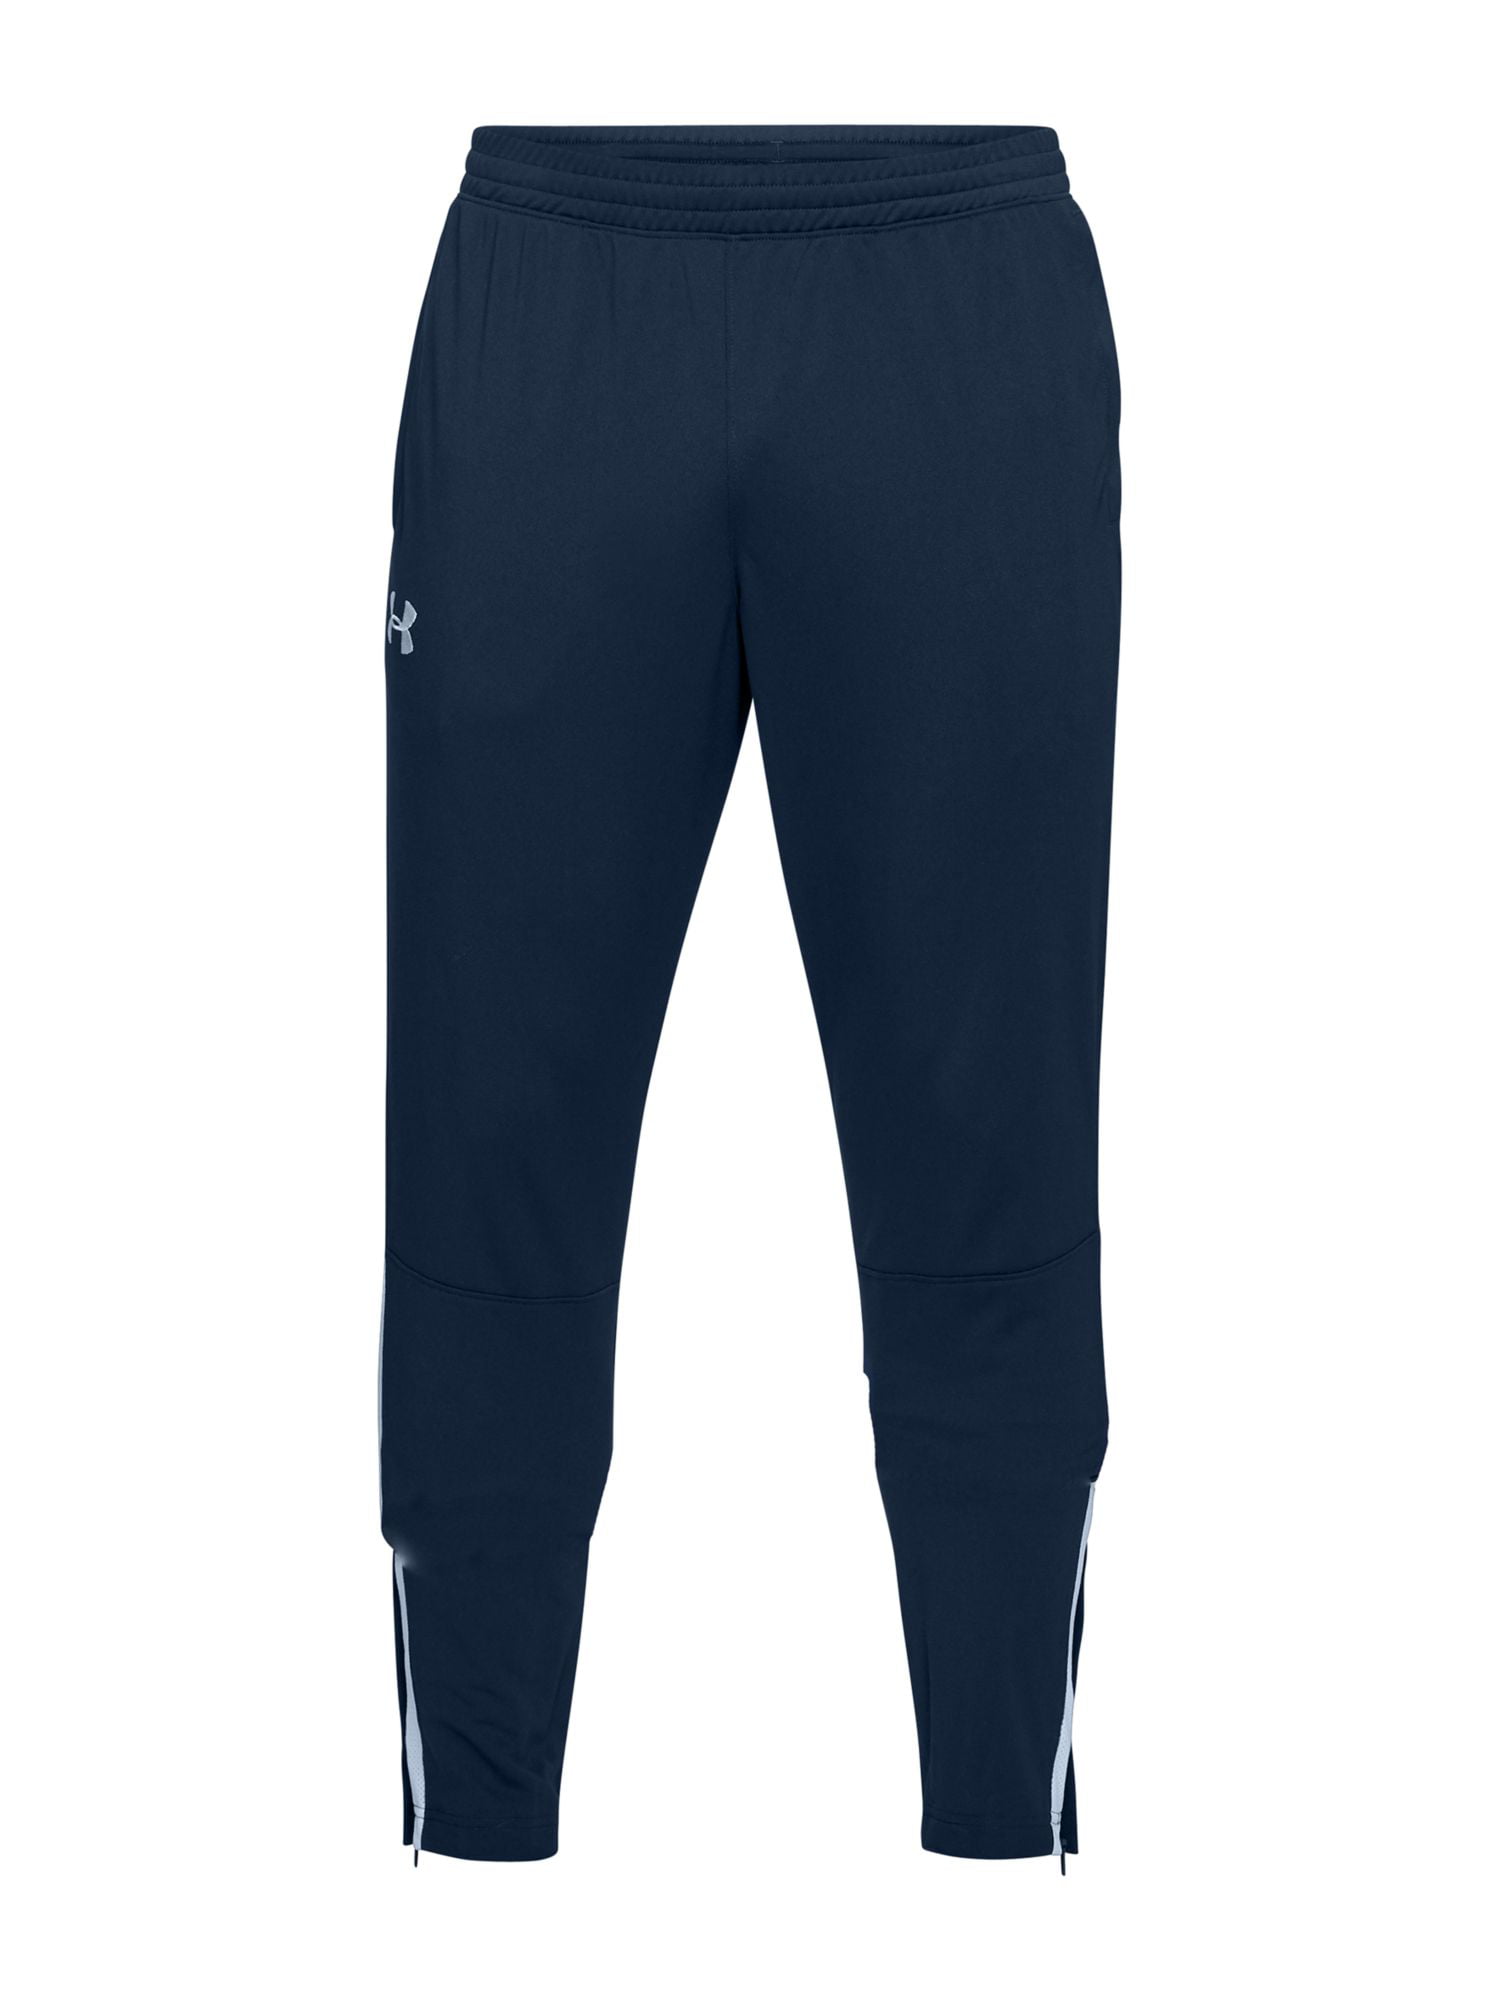 UNDER ARMOUR Mens Navy Stretch, Tapered, Logo Graphic Moisture Wicking  Pants XXLT